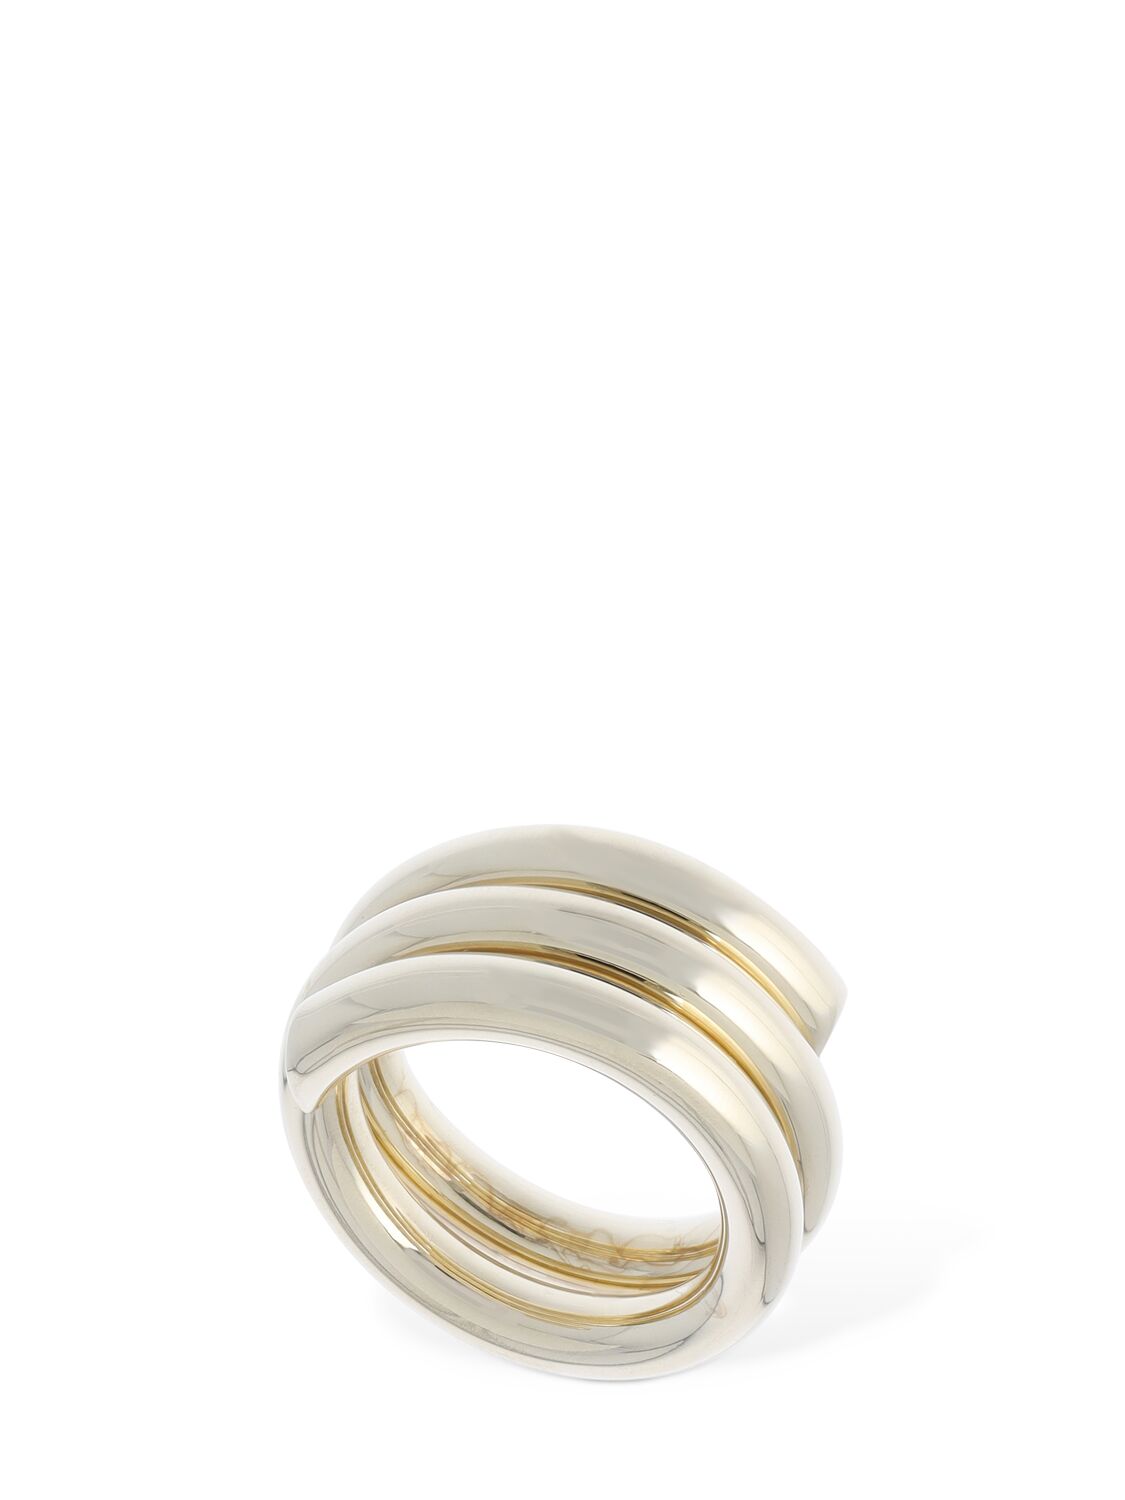 The Lilly Coil Ring